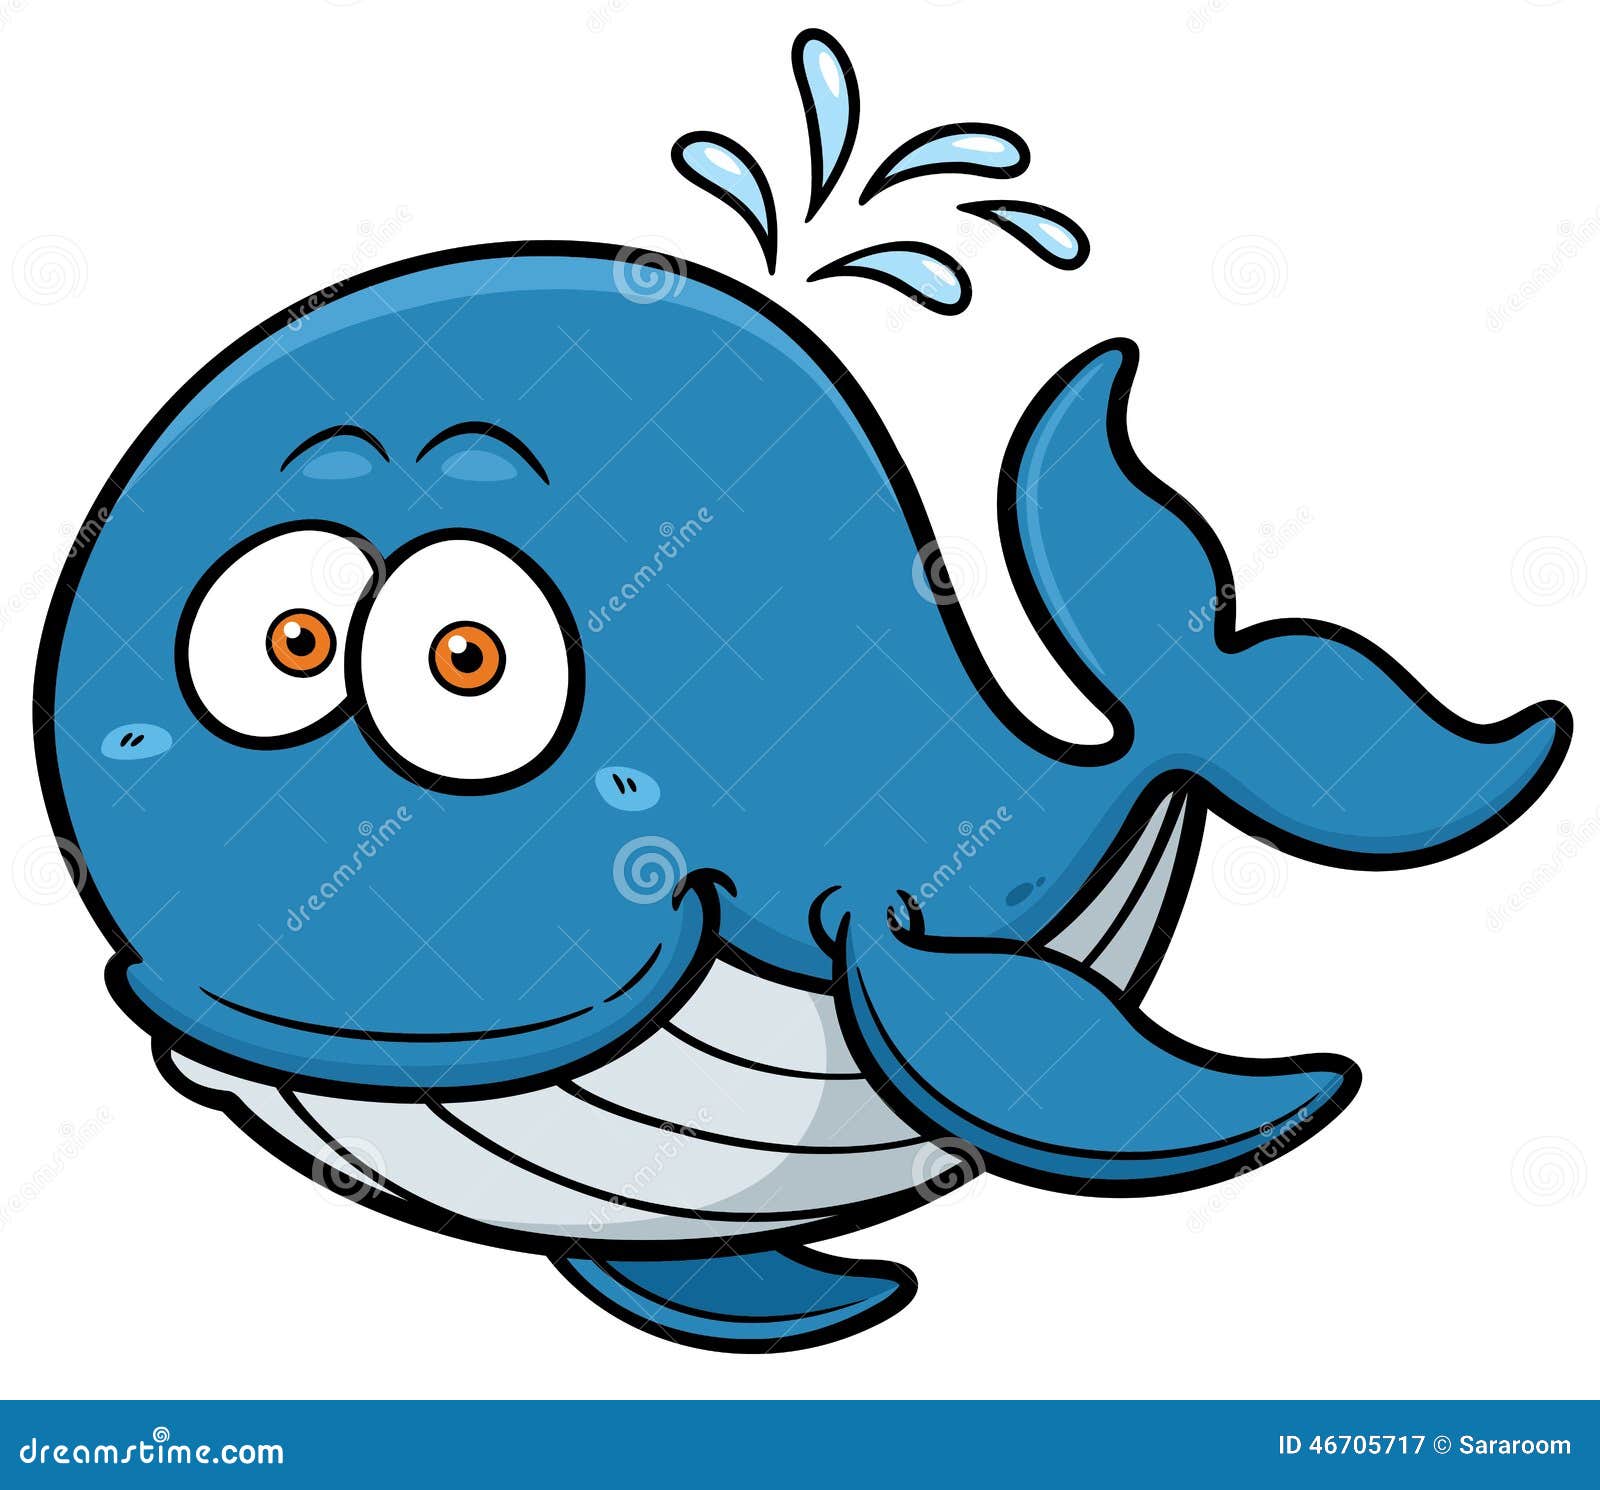 Whale stock vector. Illustration of marine, cute, clipart - 46705717